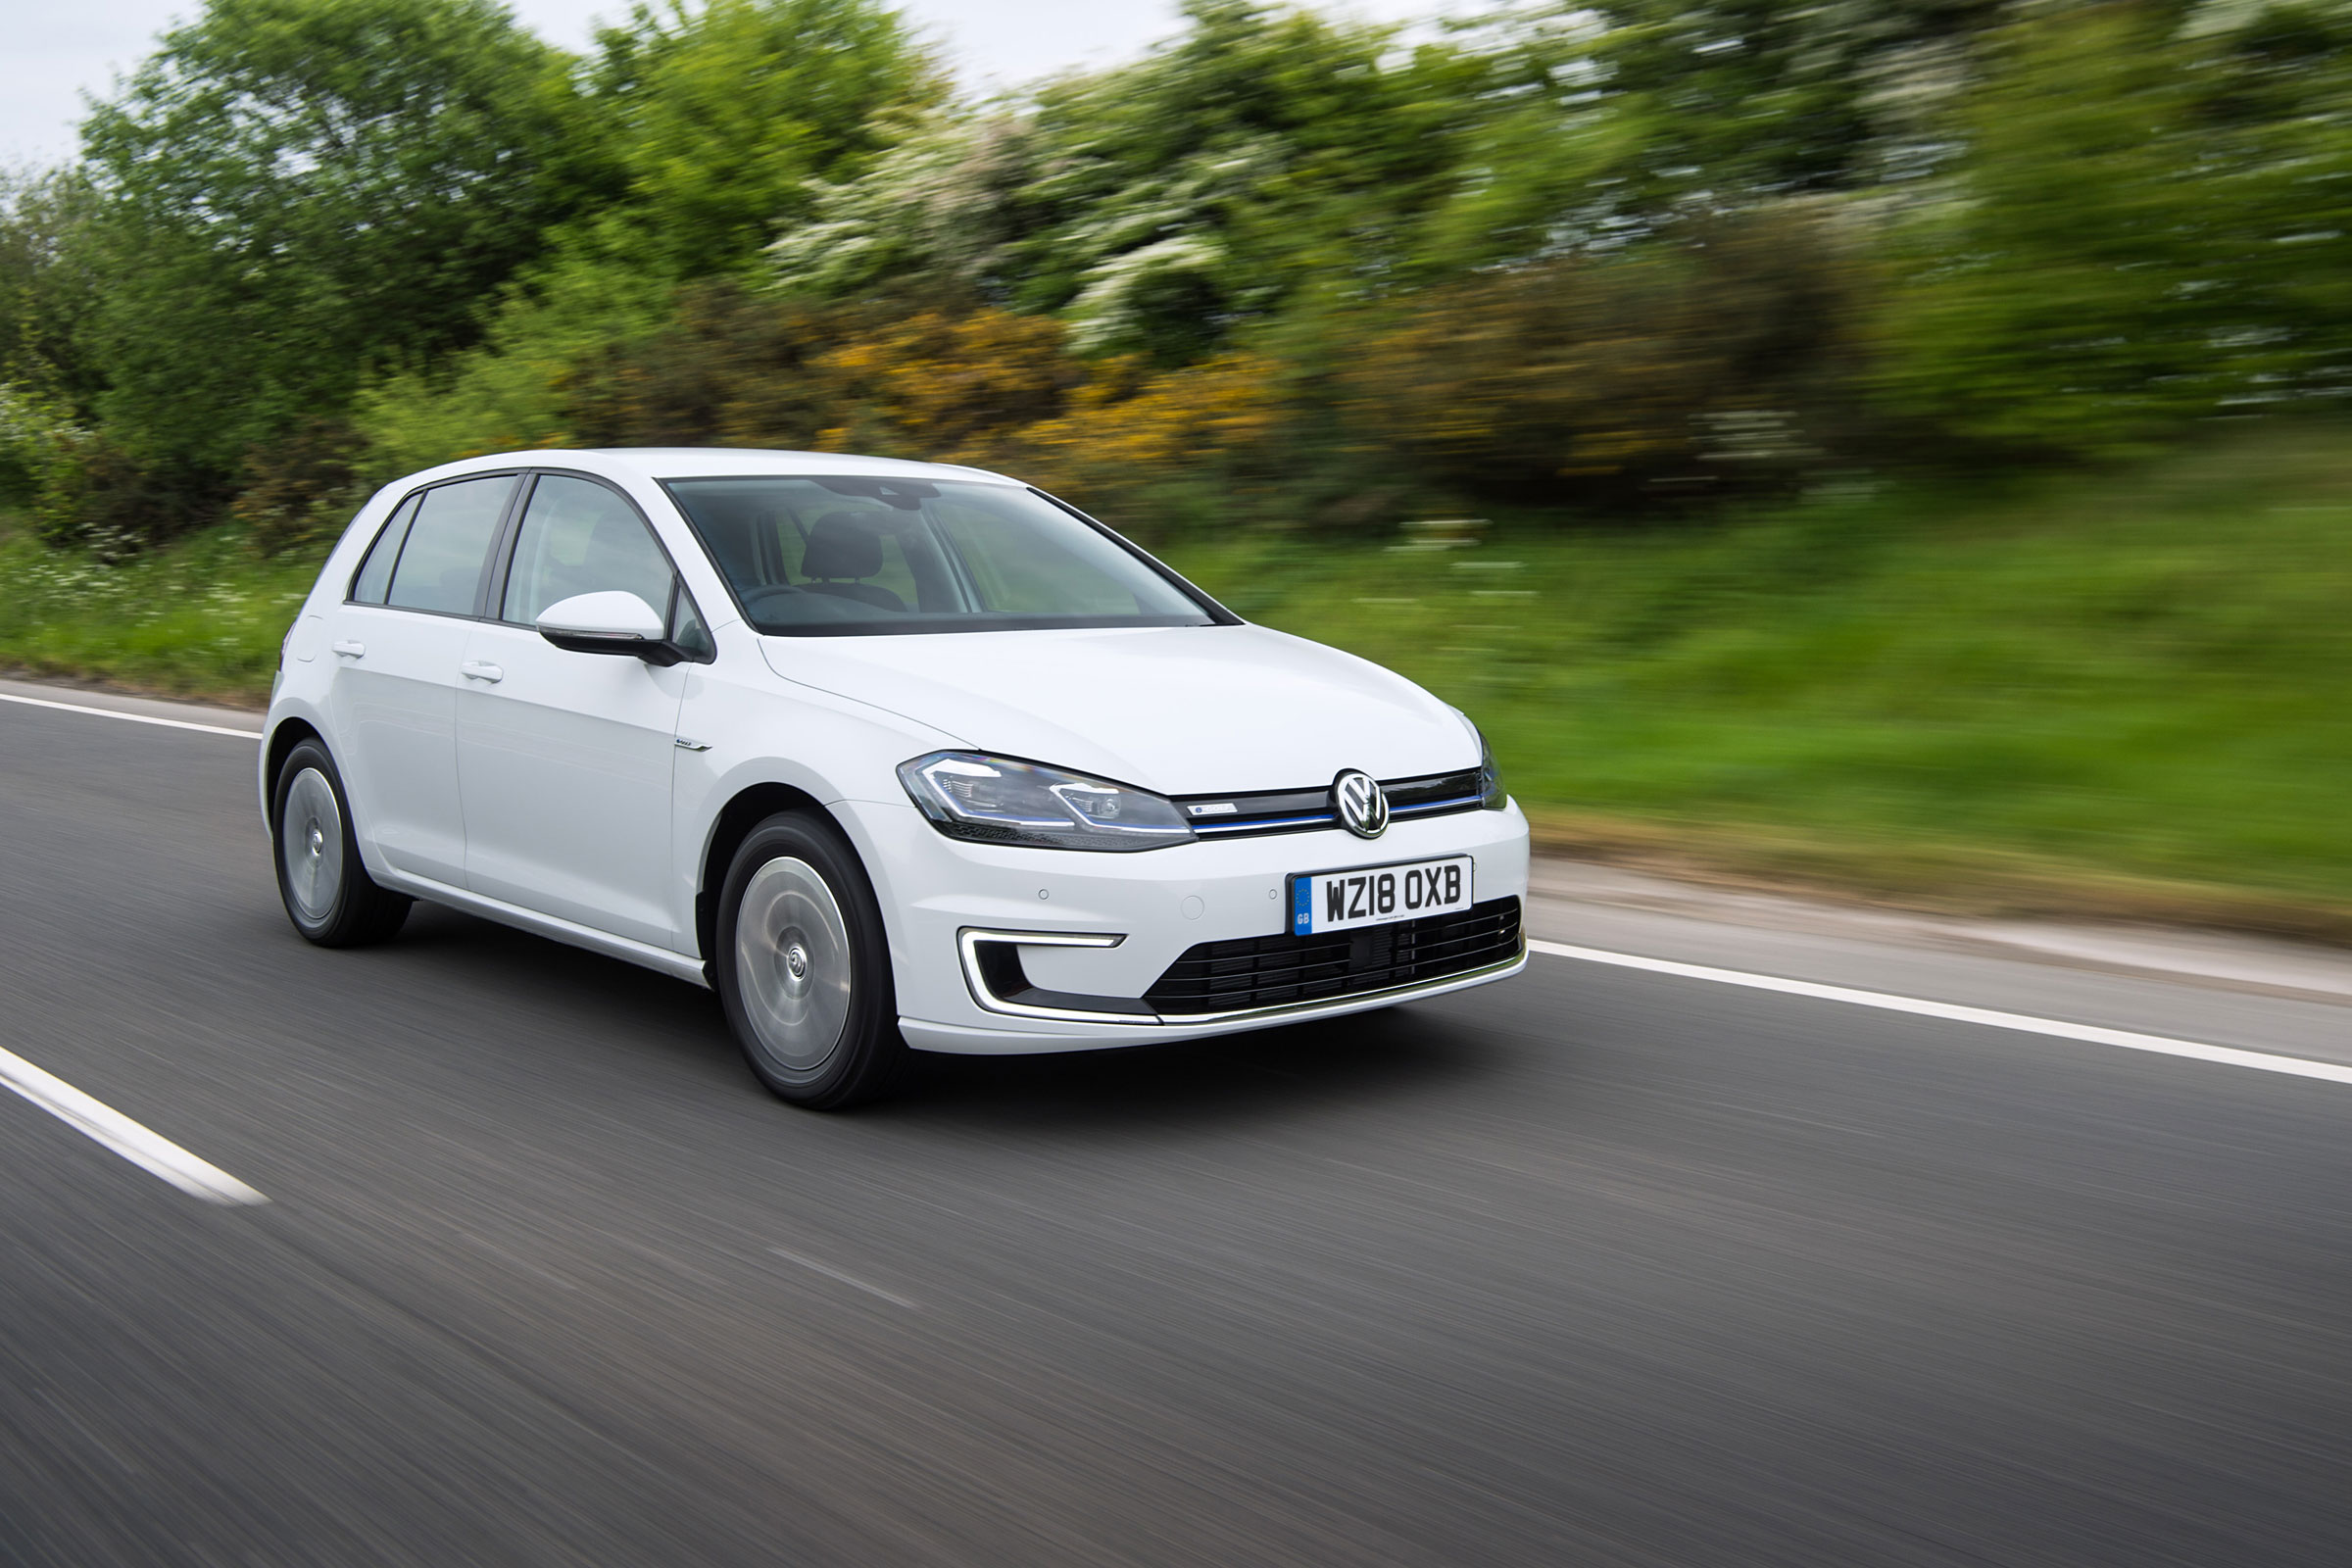 Used Volkswagen e-Golf buying guide | DrivingElectric